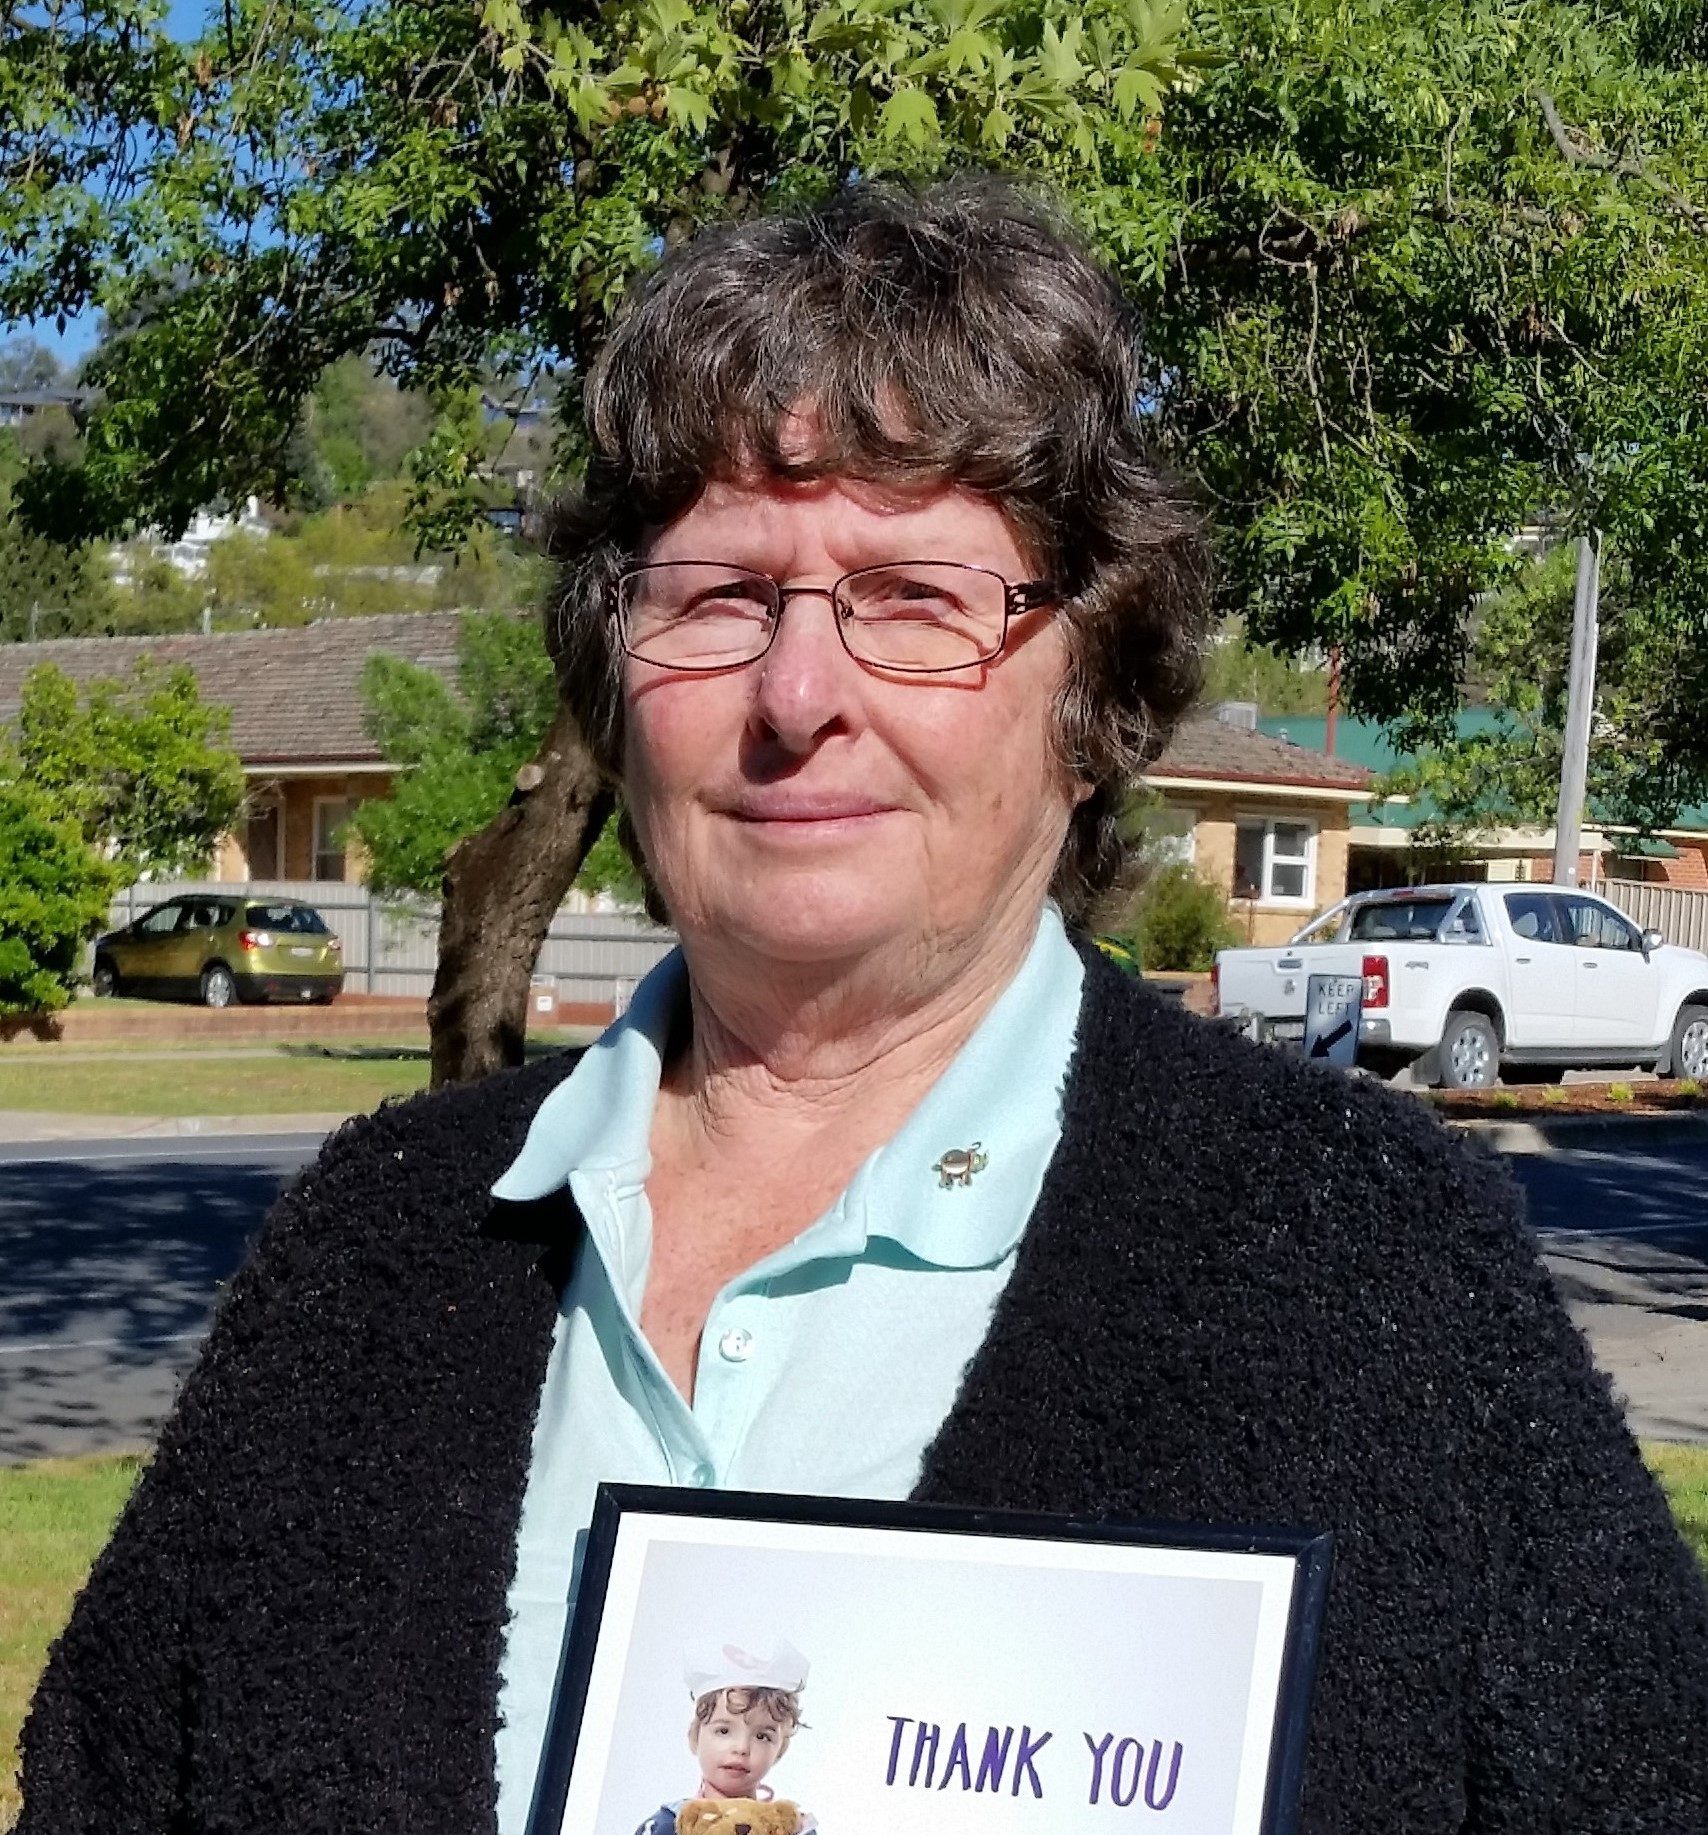 Kathie holding her Thank You certificate from the Good Friday Appeal